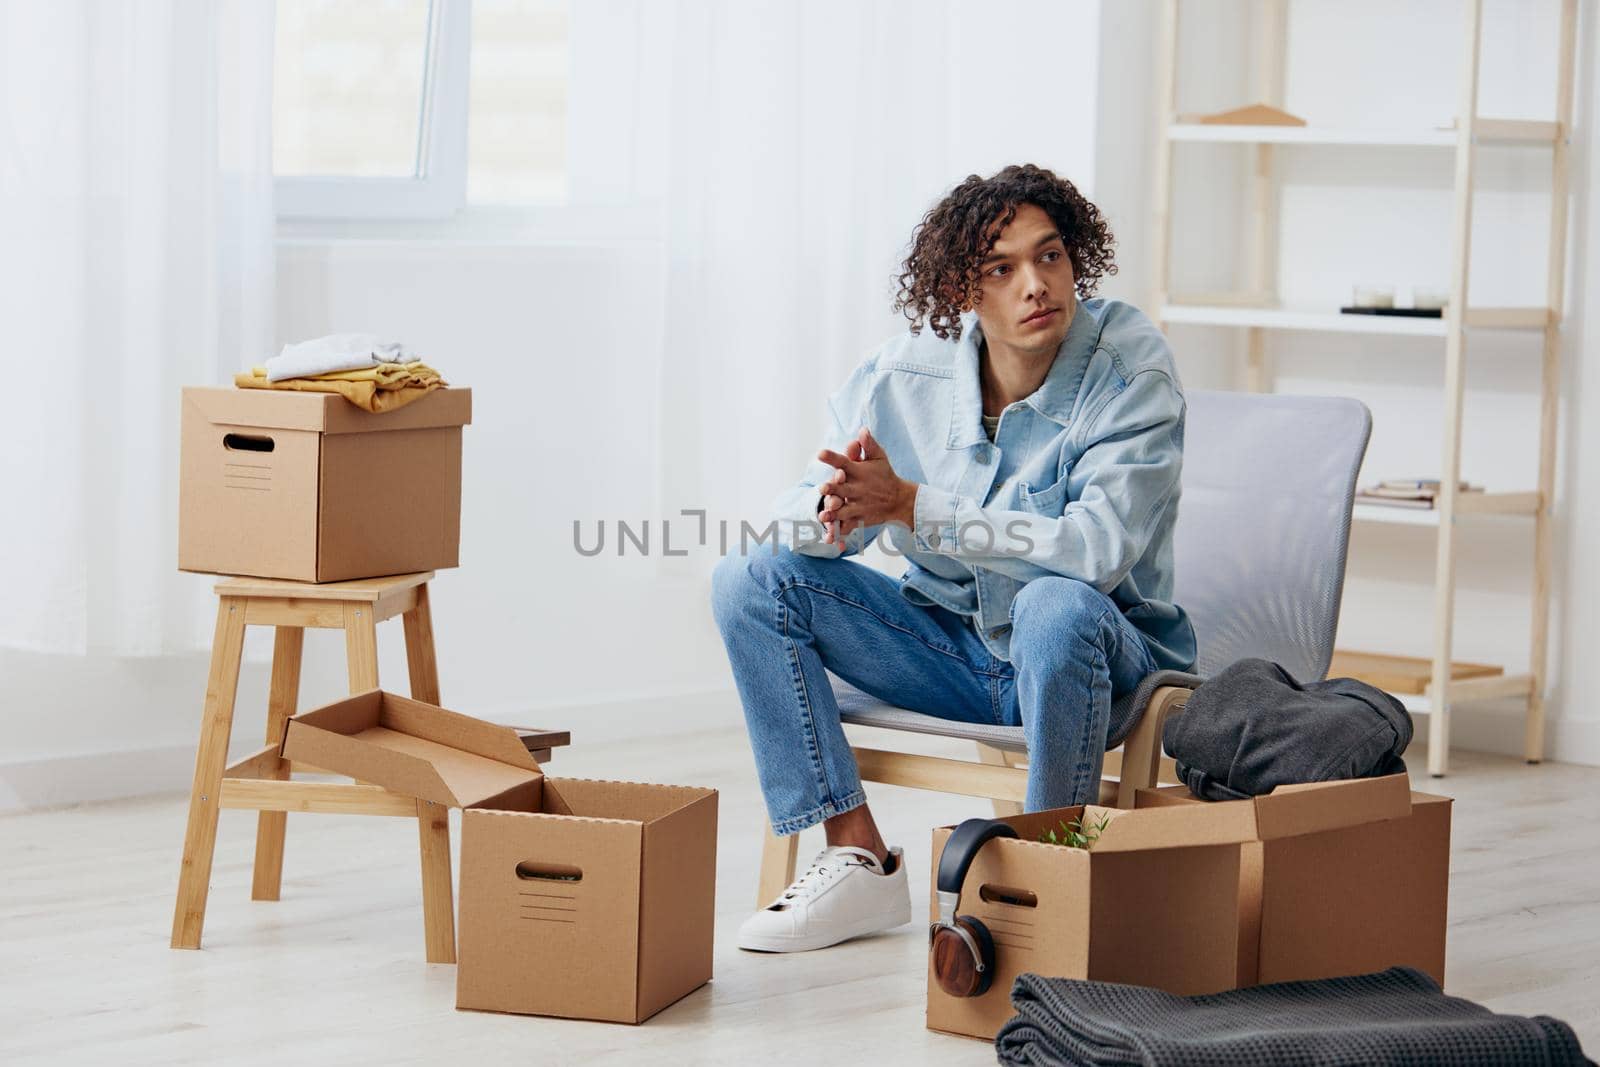 A young man unpacking things from boxes in the room interior by SHOTPRIME